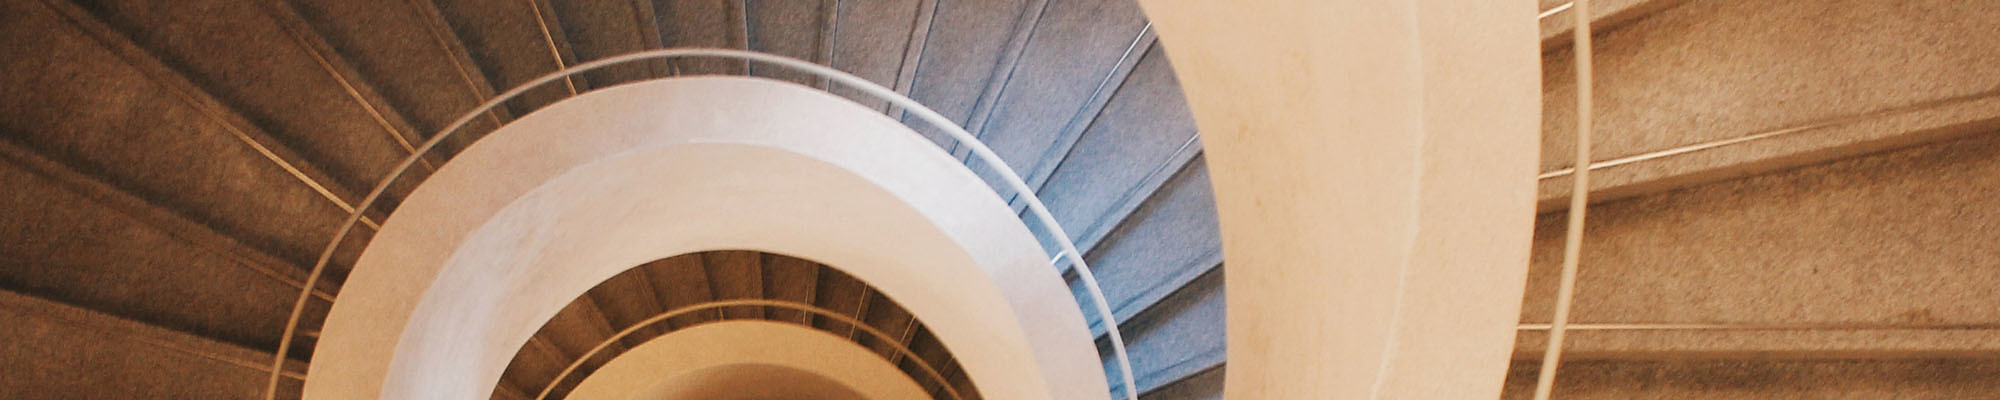 Multiple levels of a spiral staircase